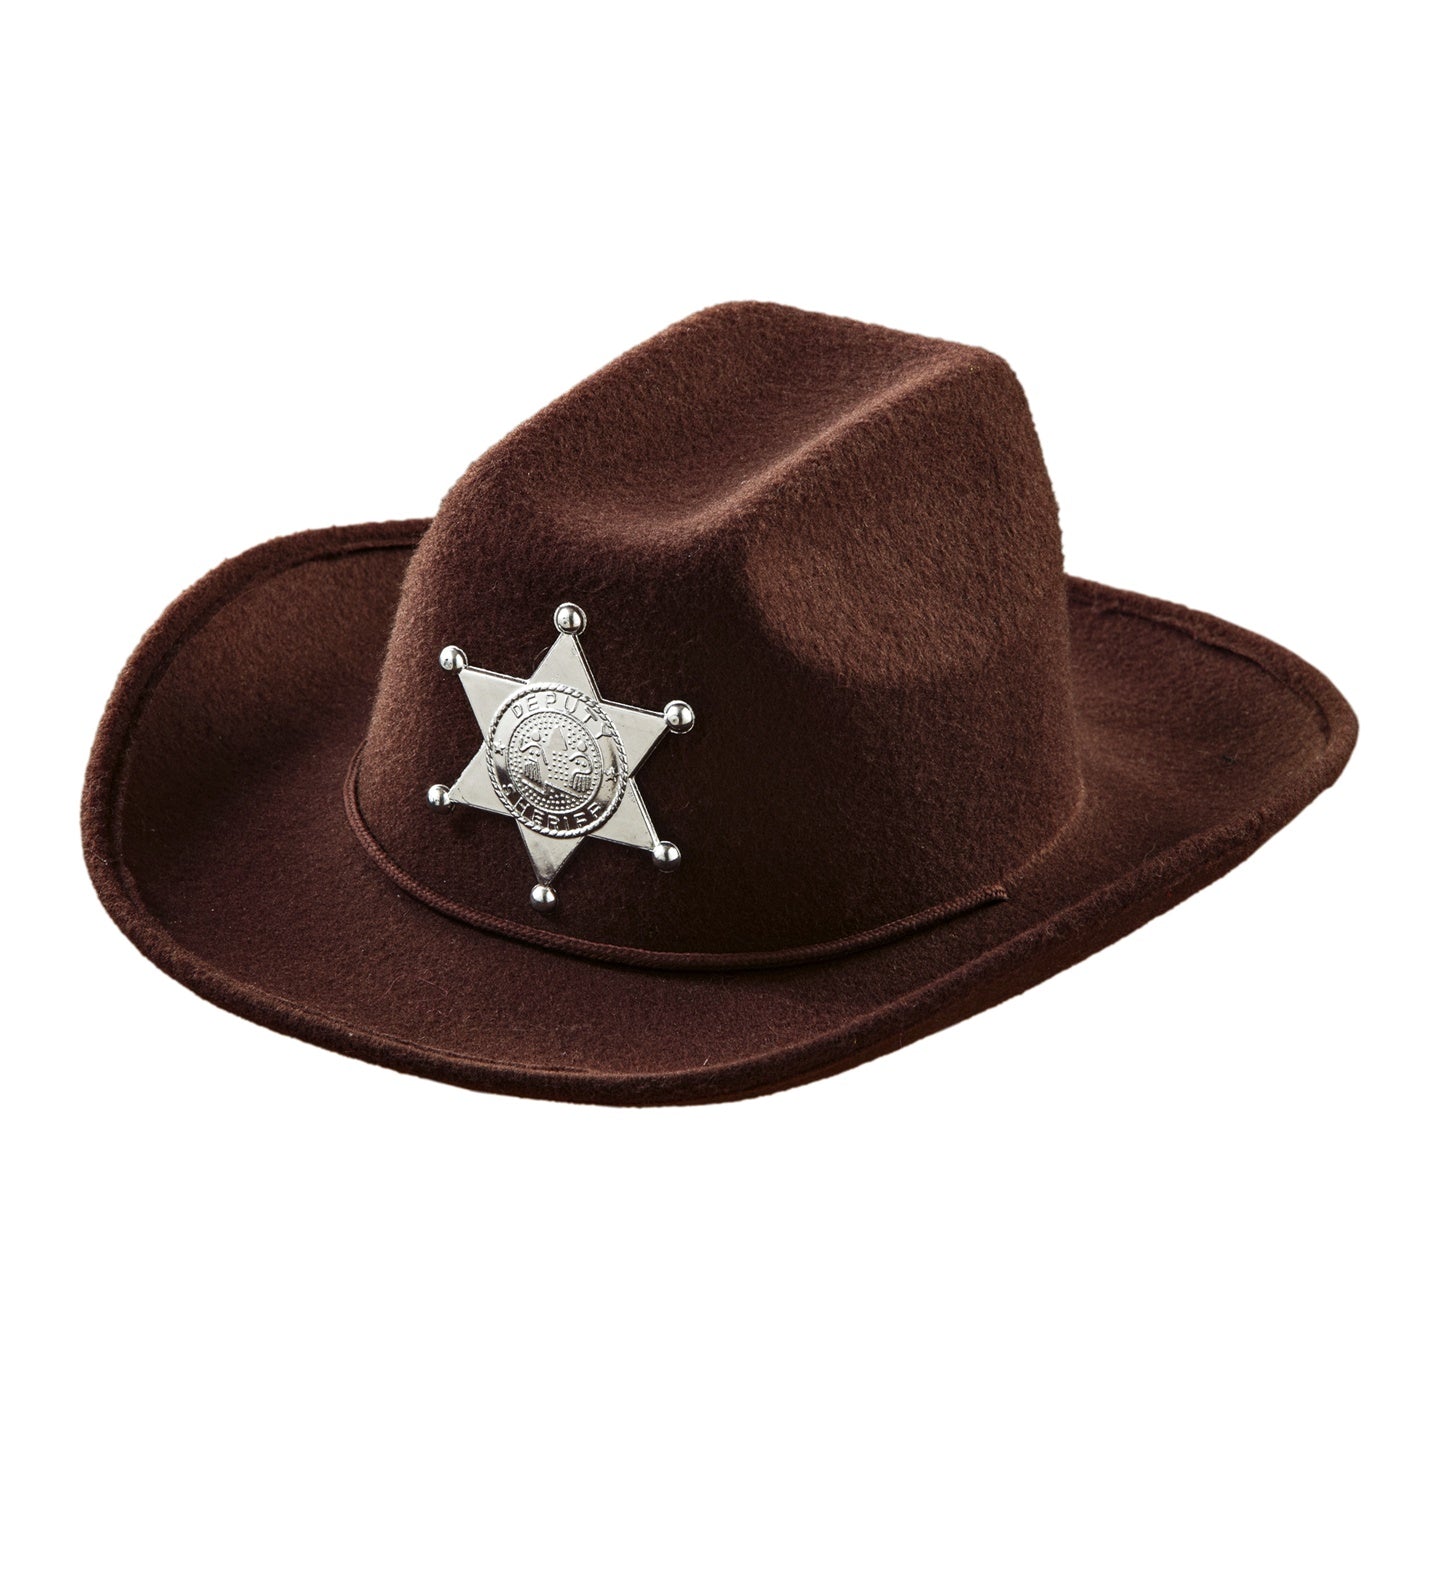 Sheriff Cowboy Hat Childs Brown